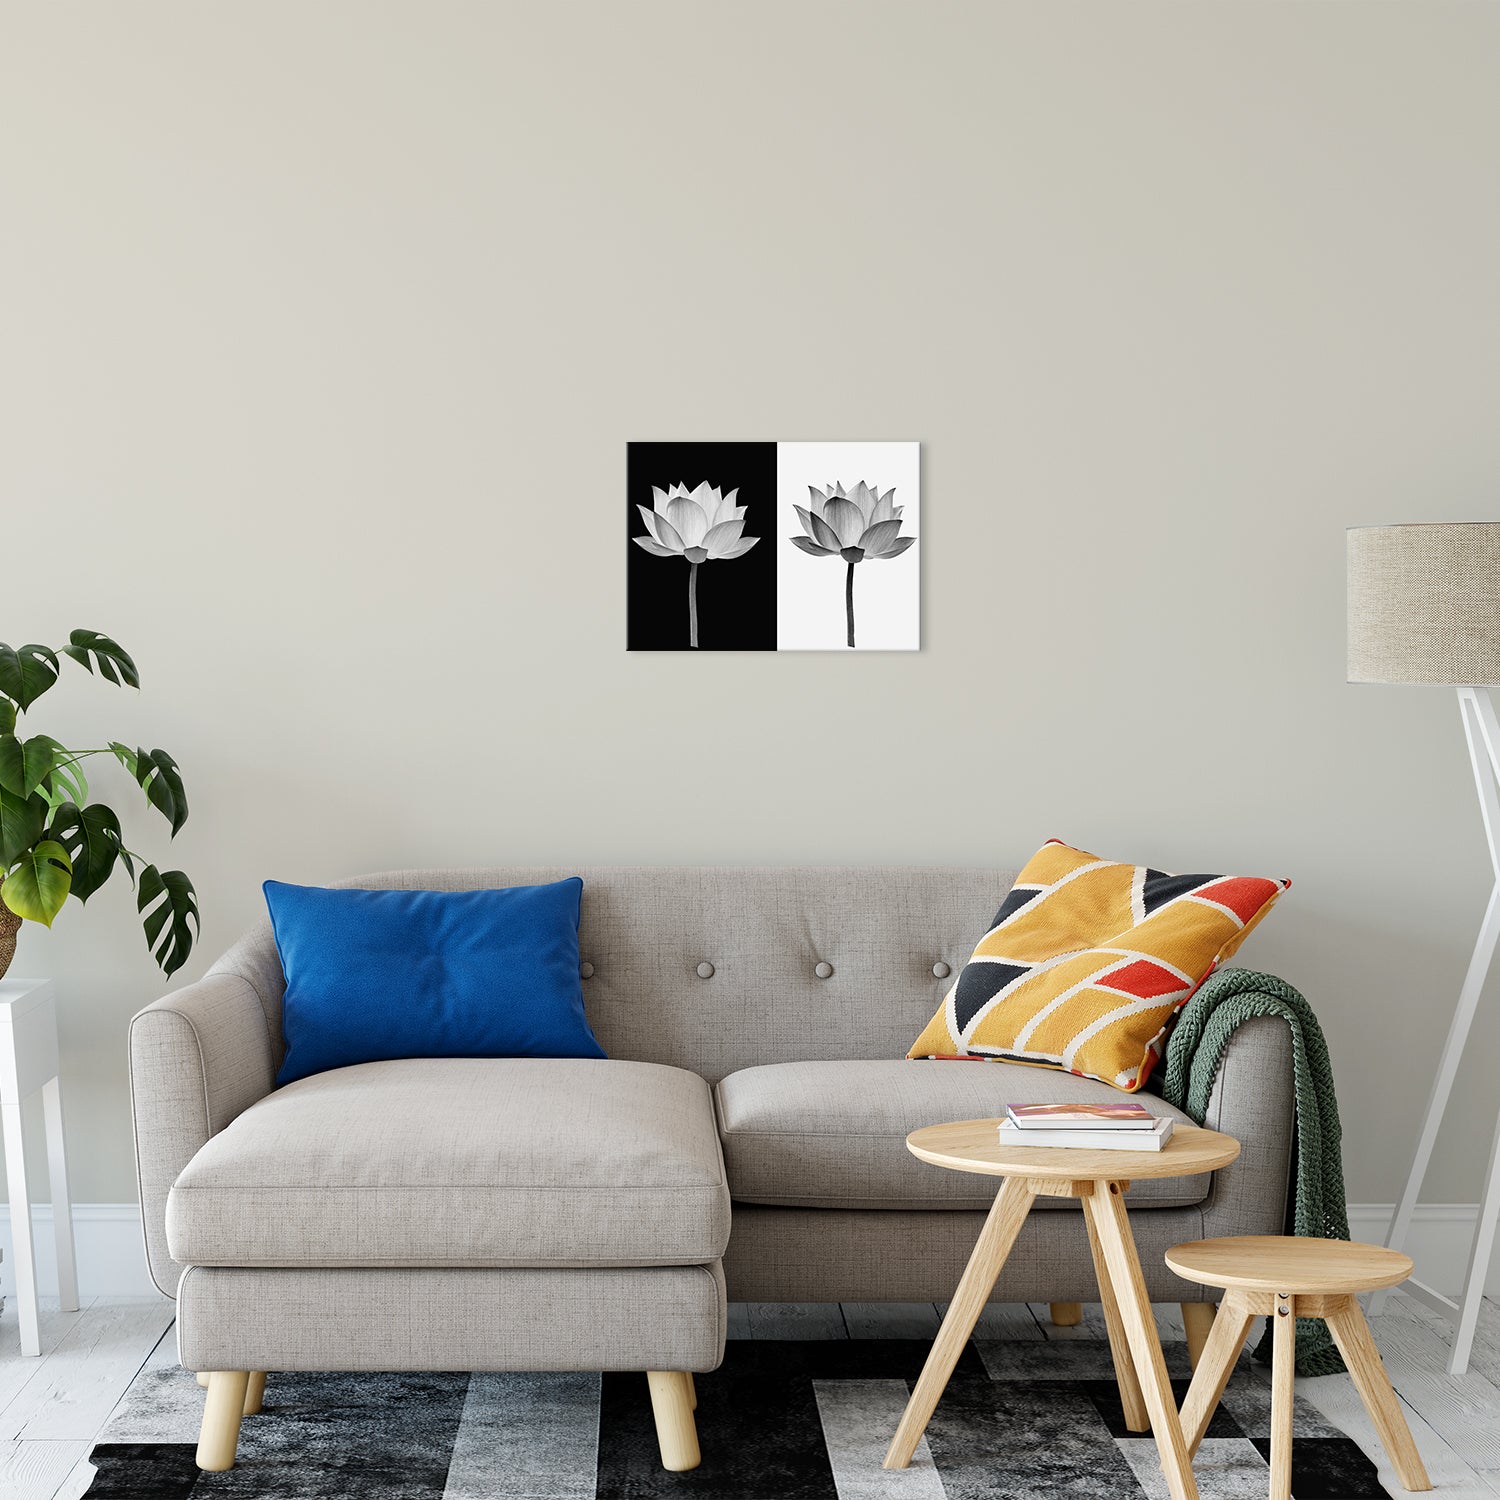 Lotus Flower on Black and White Background Floral Nature Photo Fine Art Canvas Print 16" x 20" - PIPAFINEART